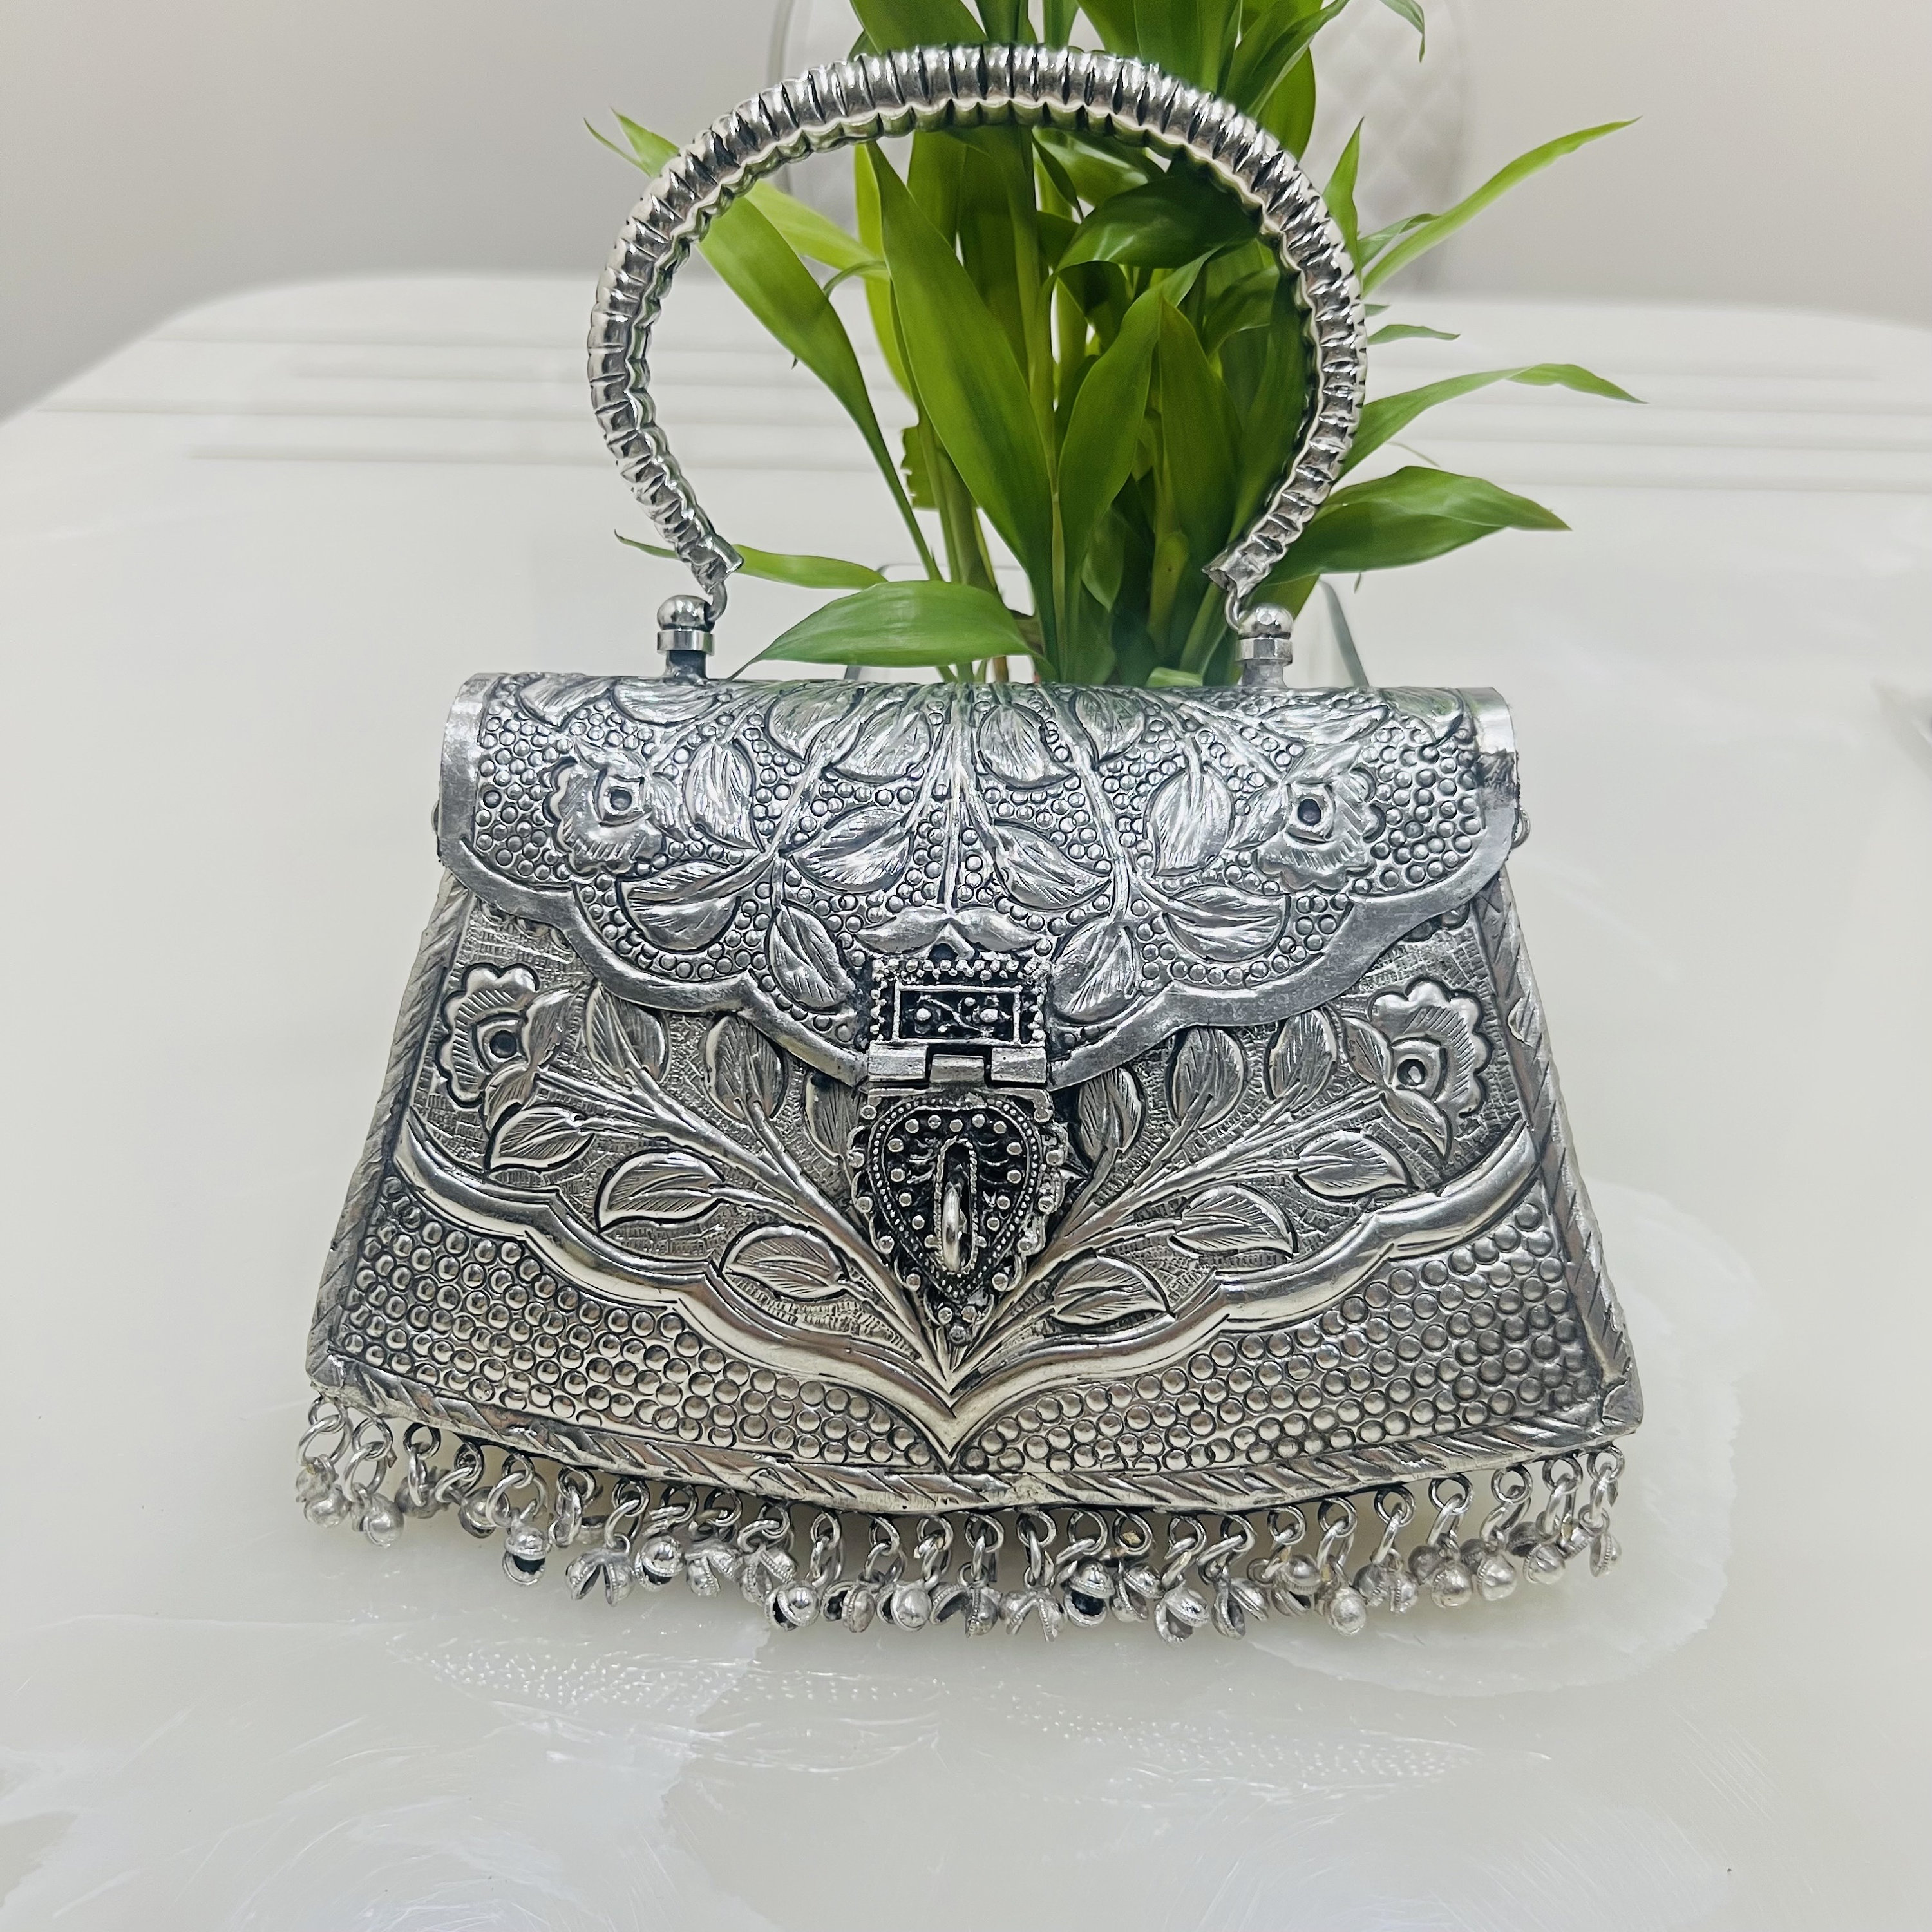 Traditional Bridal Looking Beautiful Stylish Clutch Handbag Purse For  Wedding, Party, Bridal, Casual, you can gifted